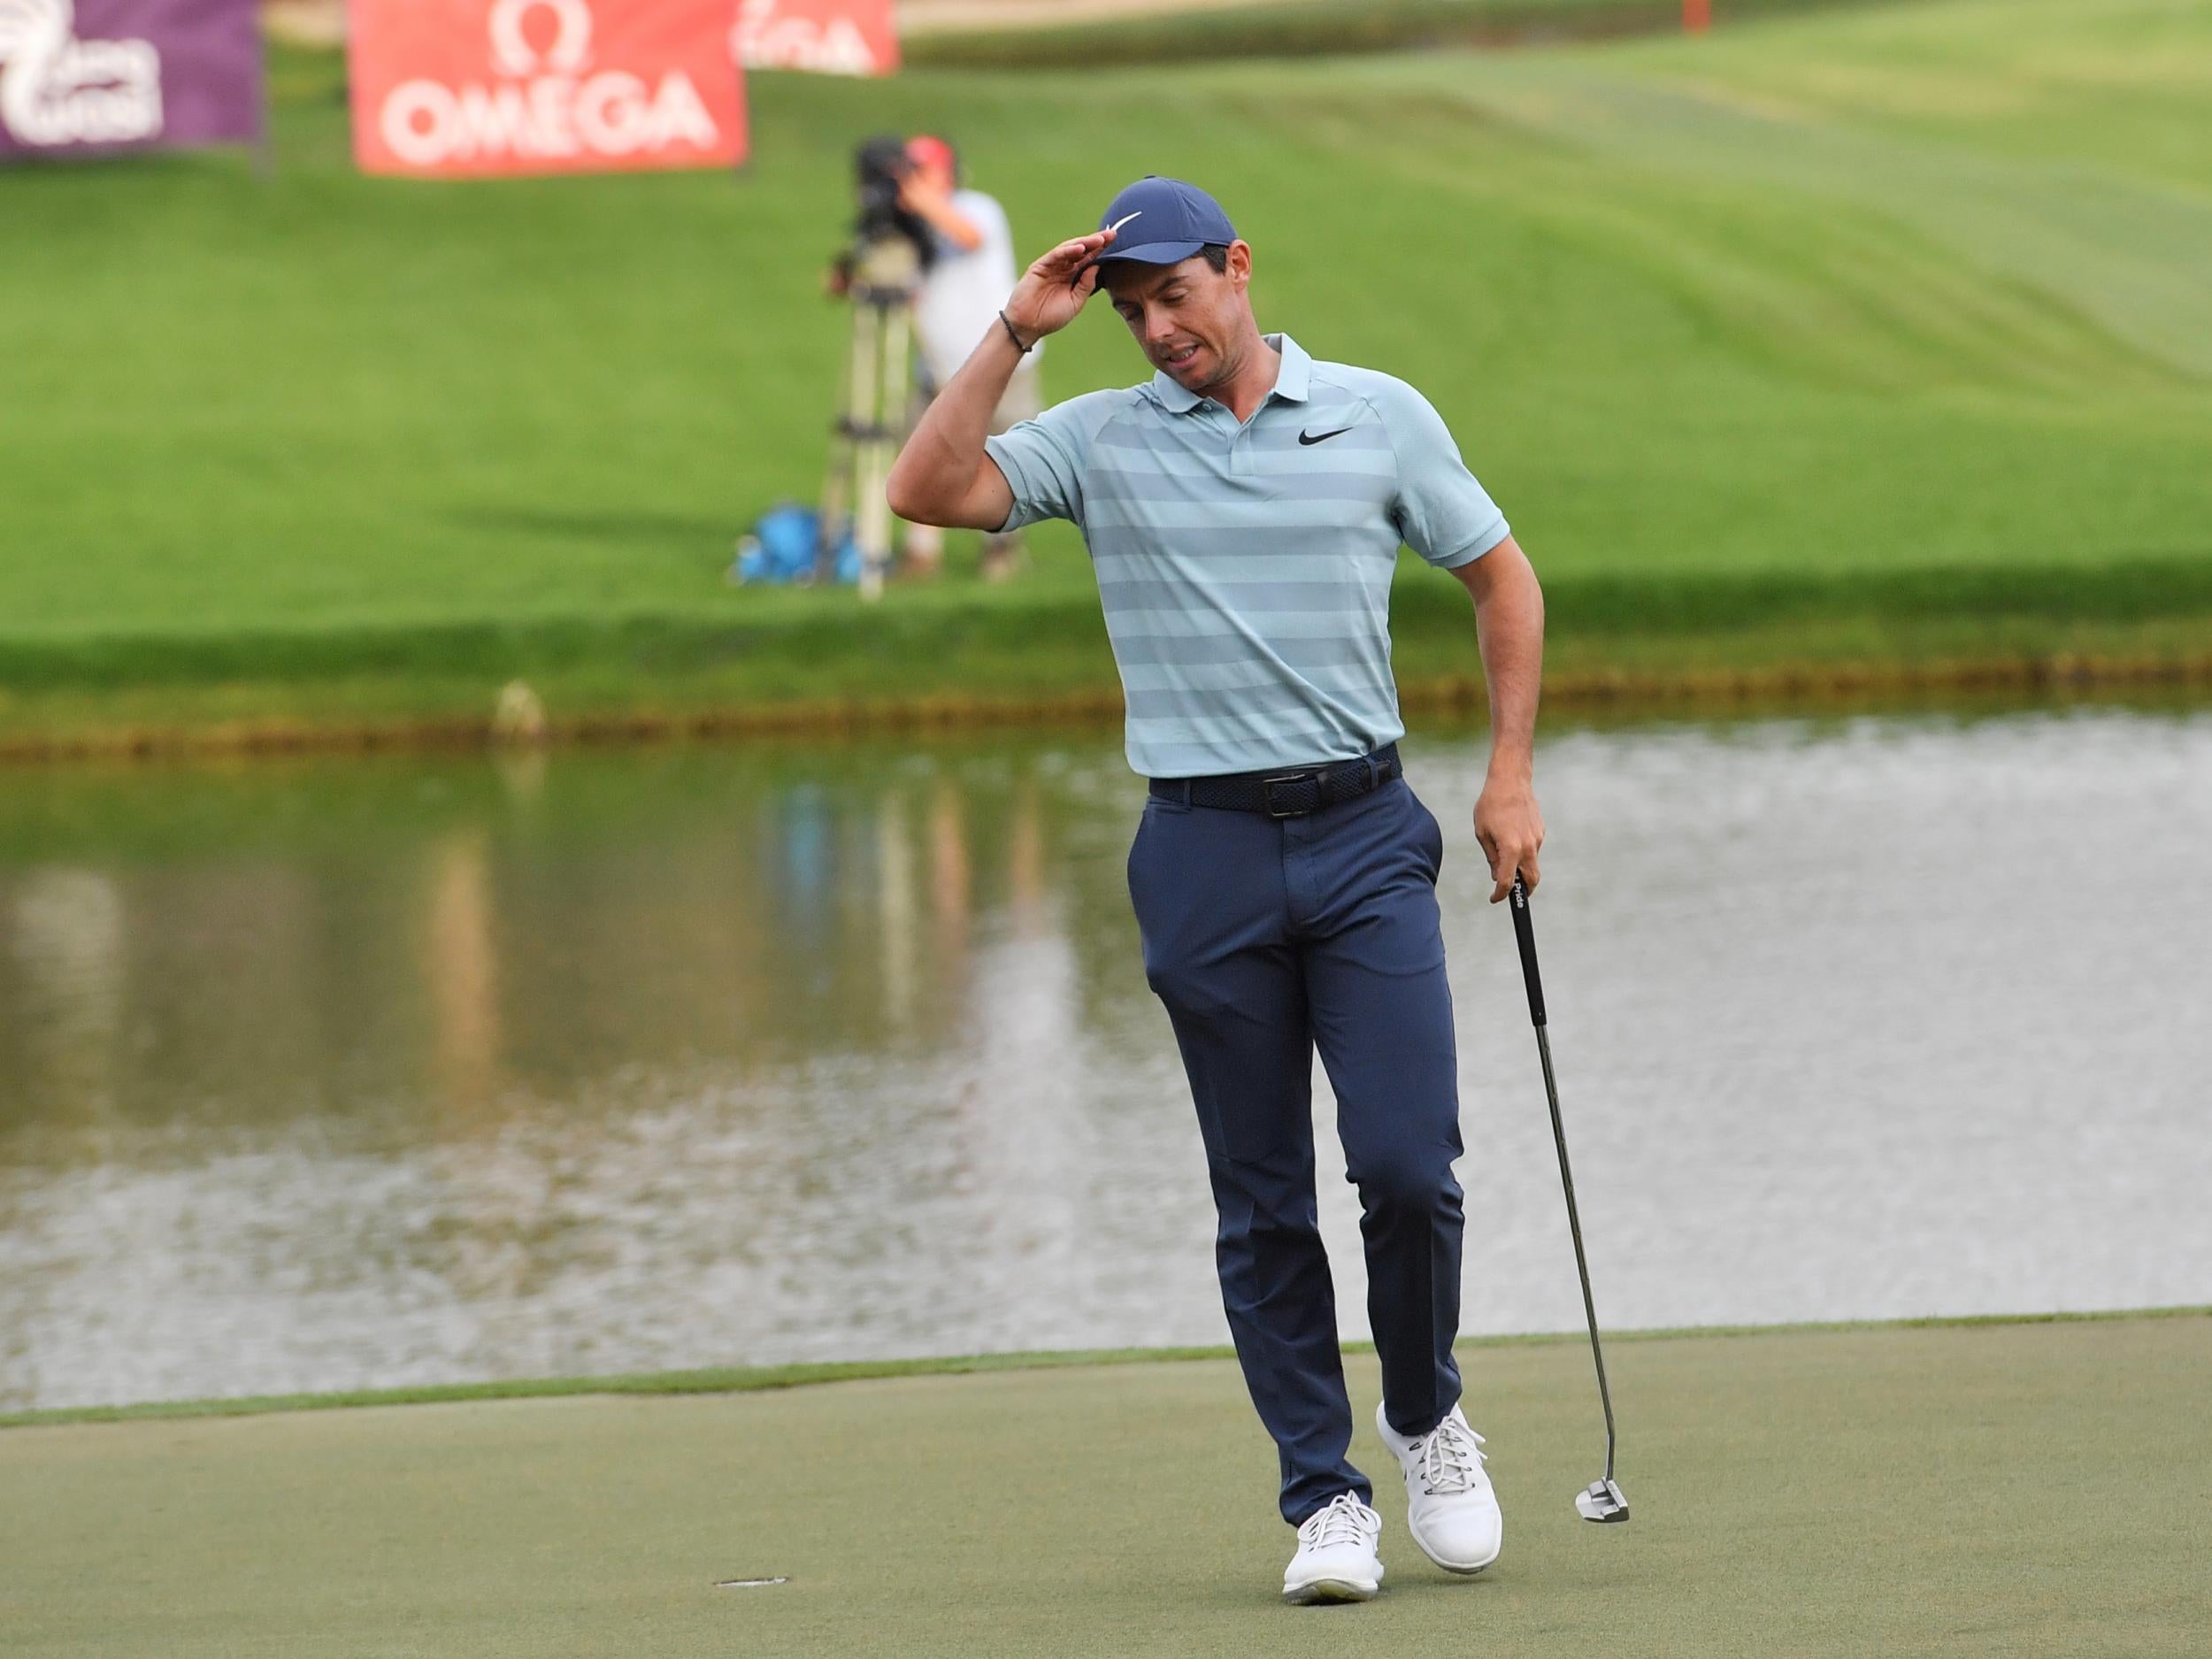 McIlroy put in an impressive showing